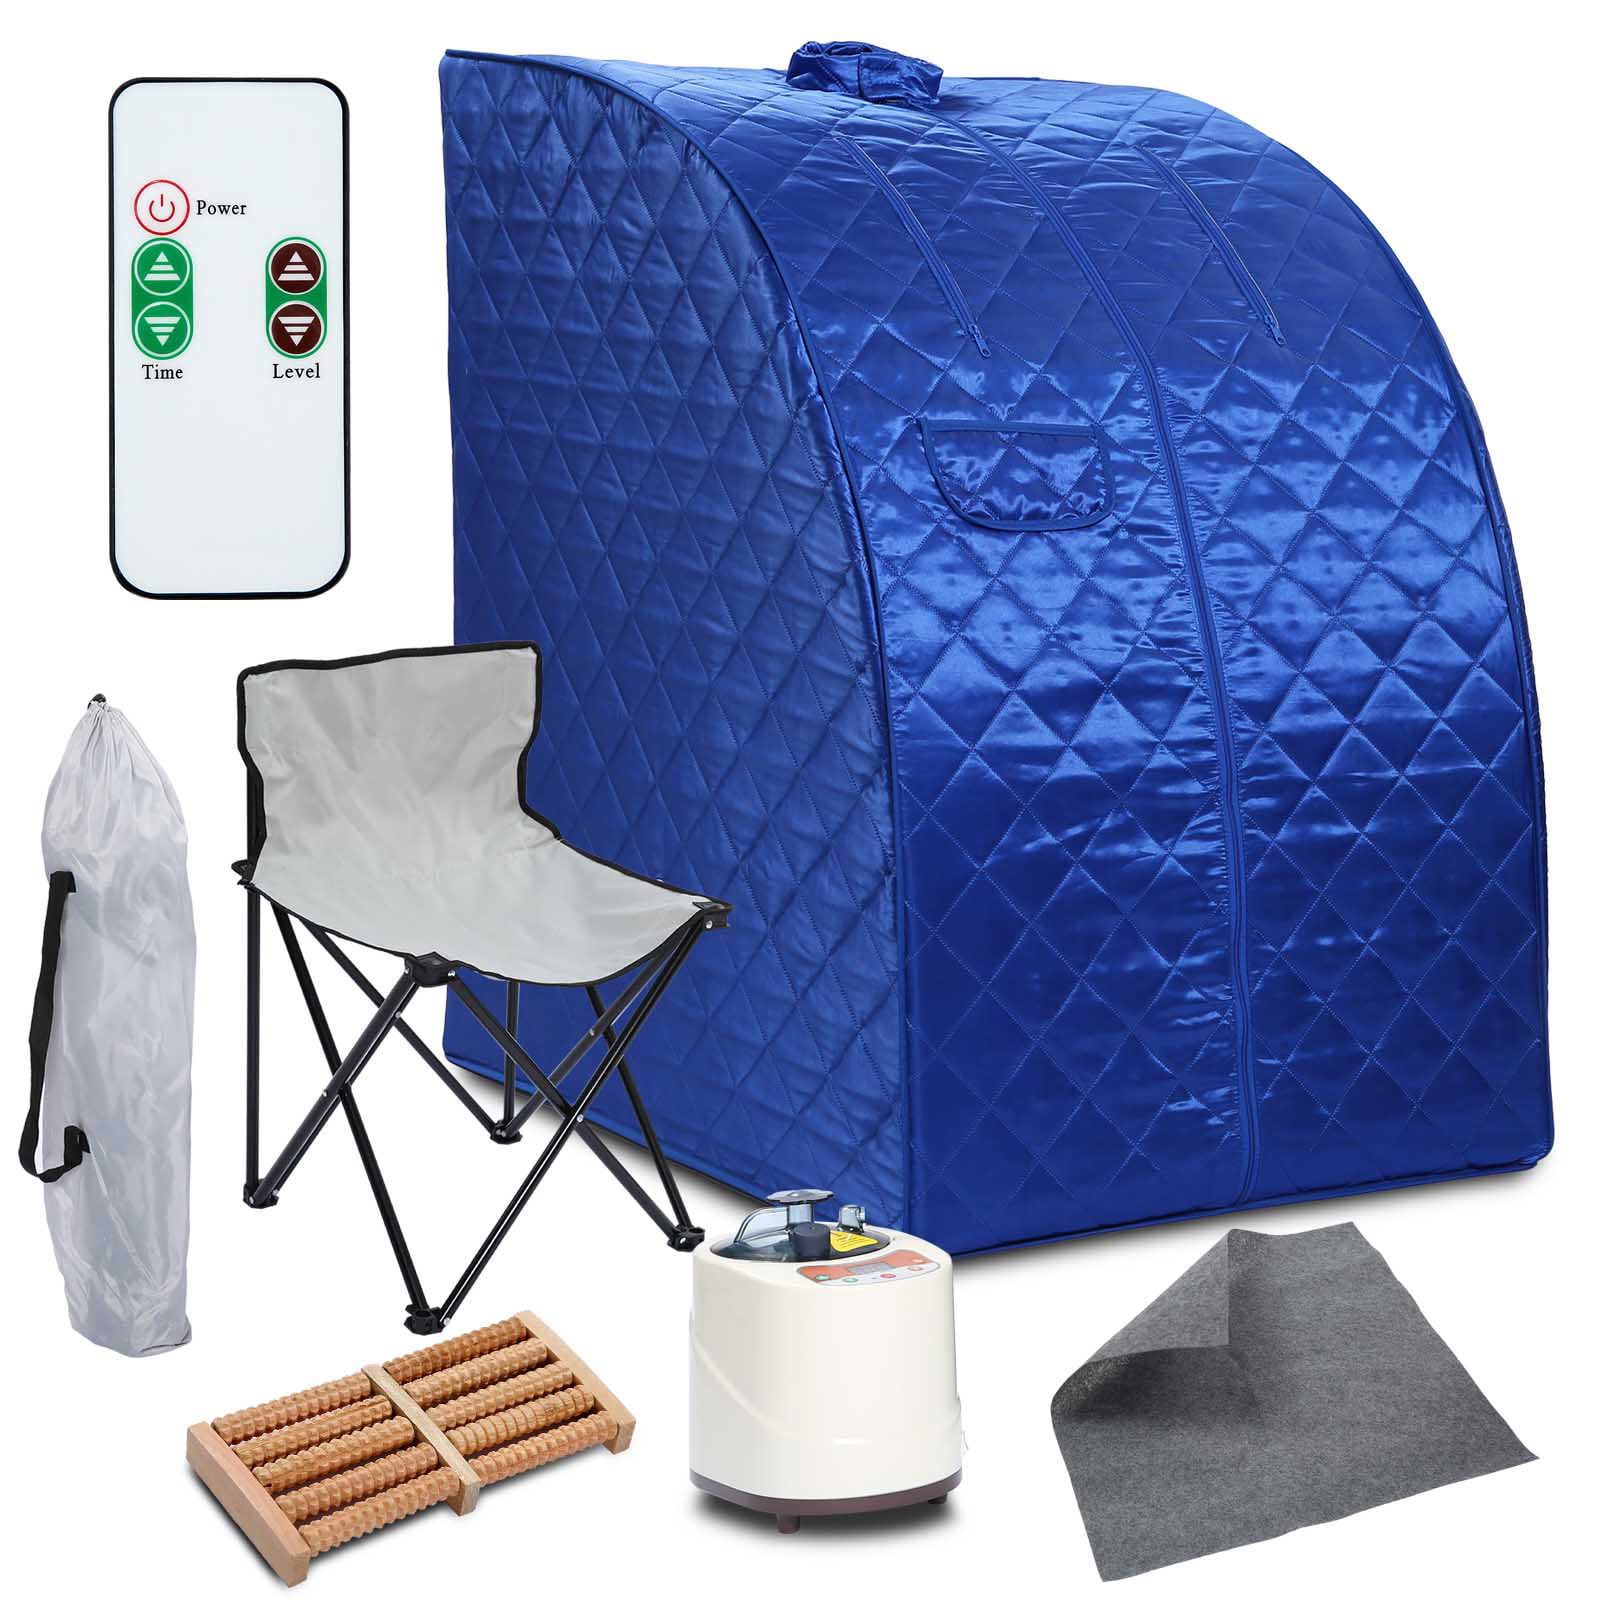 Portable Steam Sauna Tent Spa Slimming Loss Weight Full Body Detox Therapy